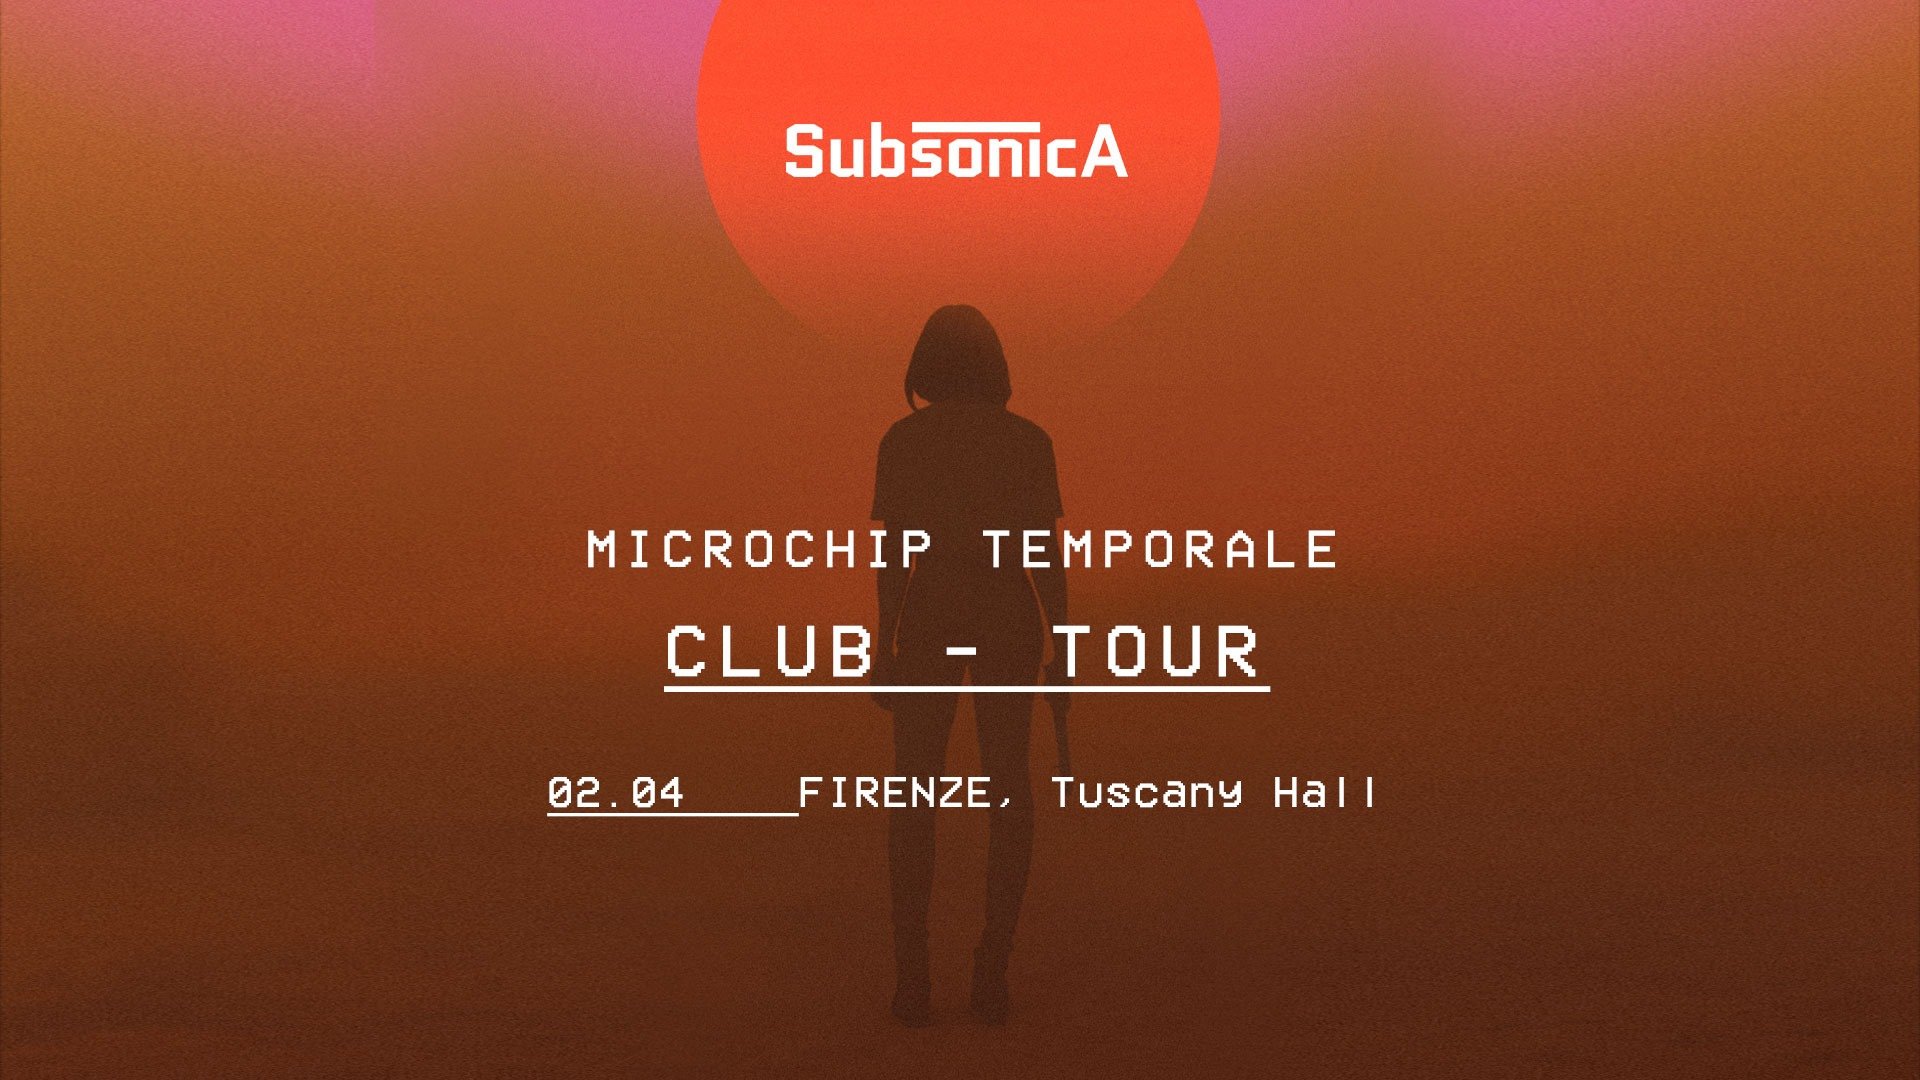 Tuscany Hall Firenze, Subsonica, Microchip Temporale